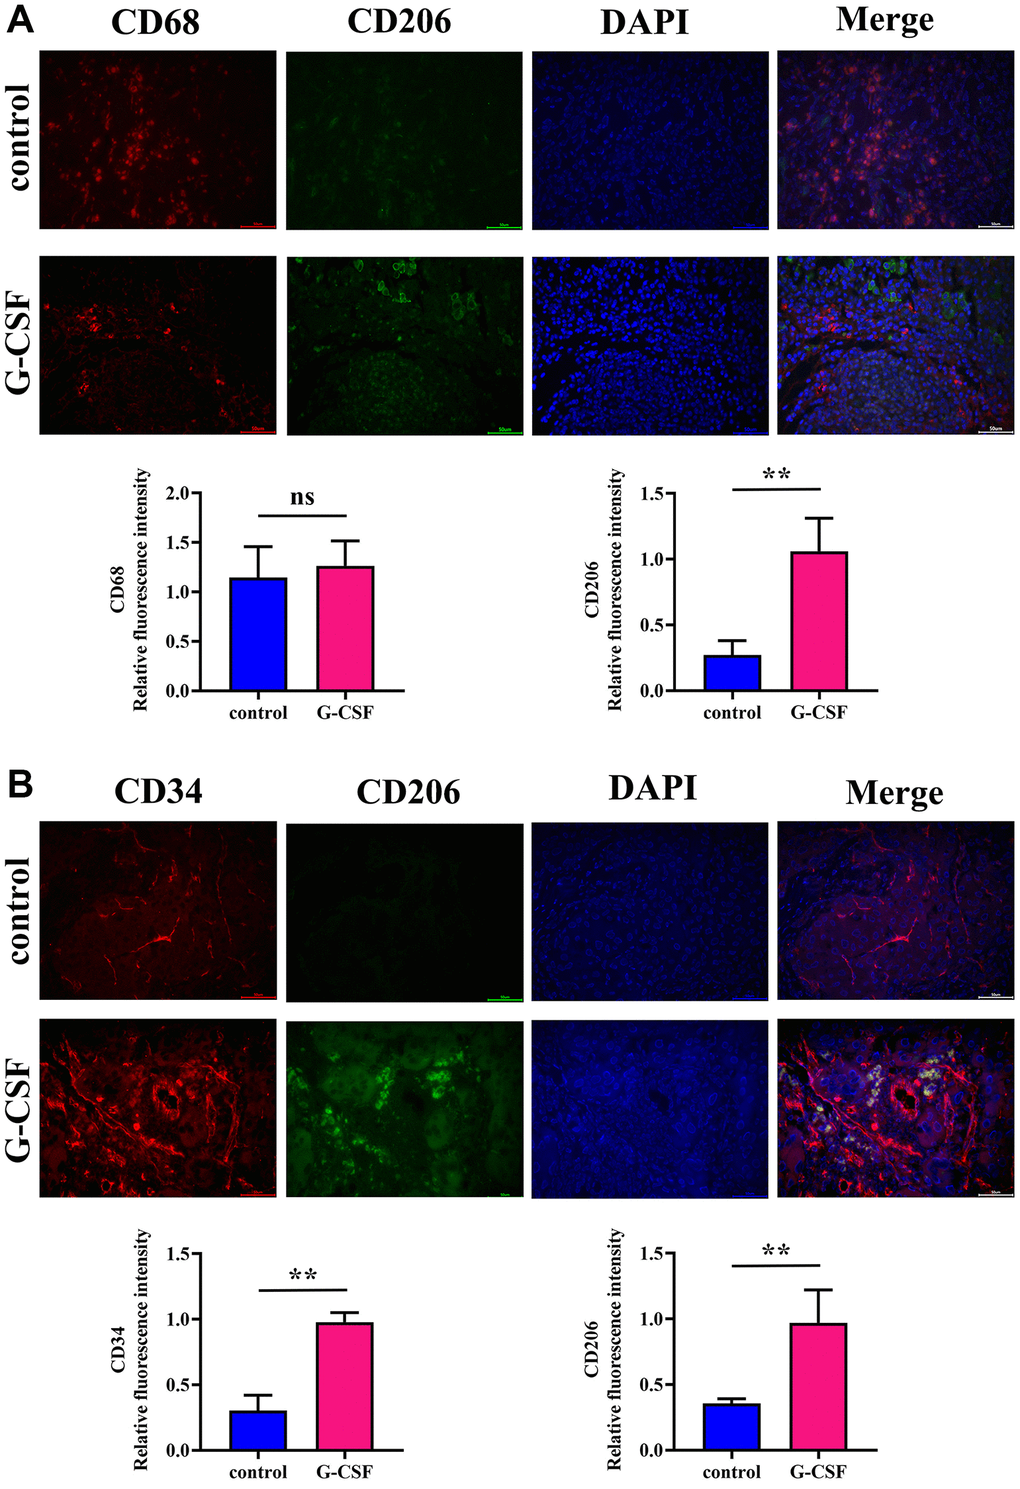 Assessment of M2-type macrophage expression and angiogenic quantification in neoplastic tissues via immunofluorescence. (A) Detection of Mannose (depicted in green)/CD68 (depicted in red) expression levels within neoplasm-bearing tissues. (B) Detection of CD34 (depicted in red)/Mannose (depicted in green) expression levels within neoplasm-bearing tissues. The P-value is less than 0.05.